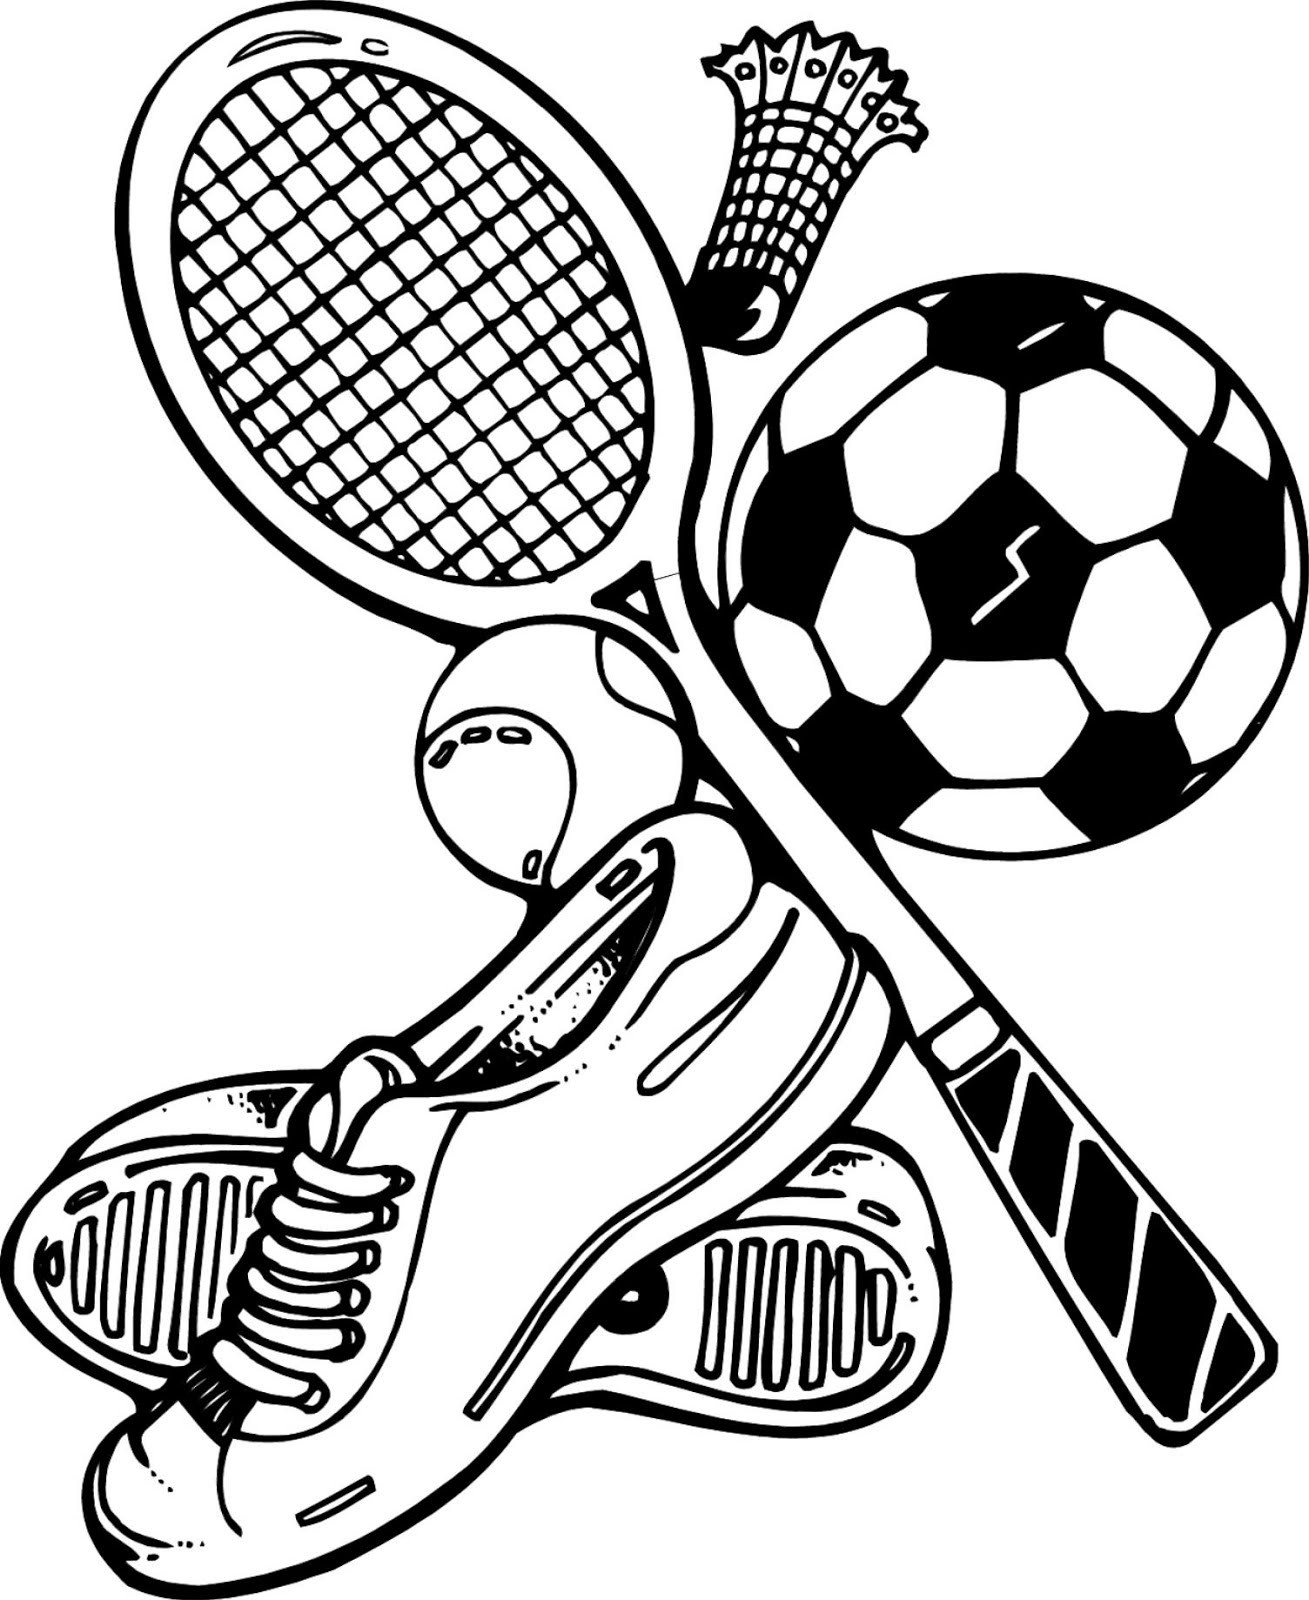 Printable Sports Coloring Pages
 Free Printable Sports Coloring Pages